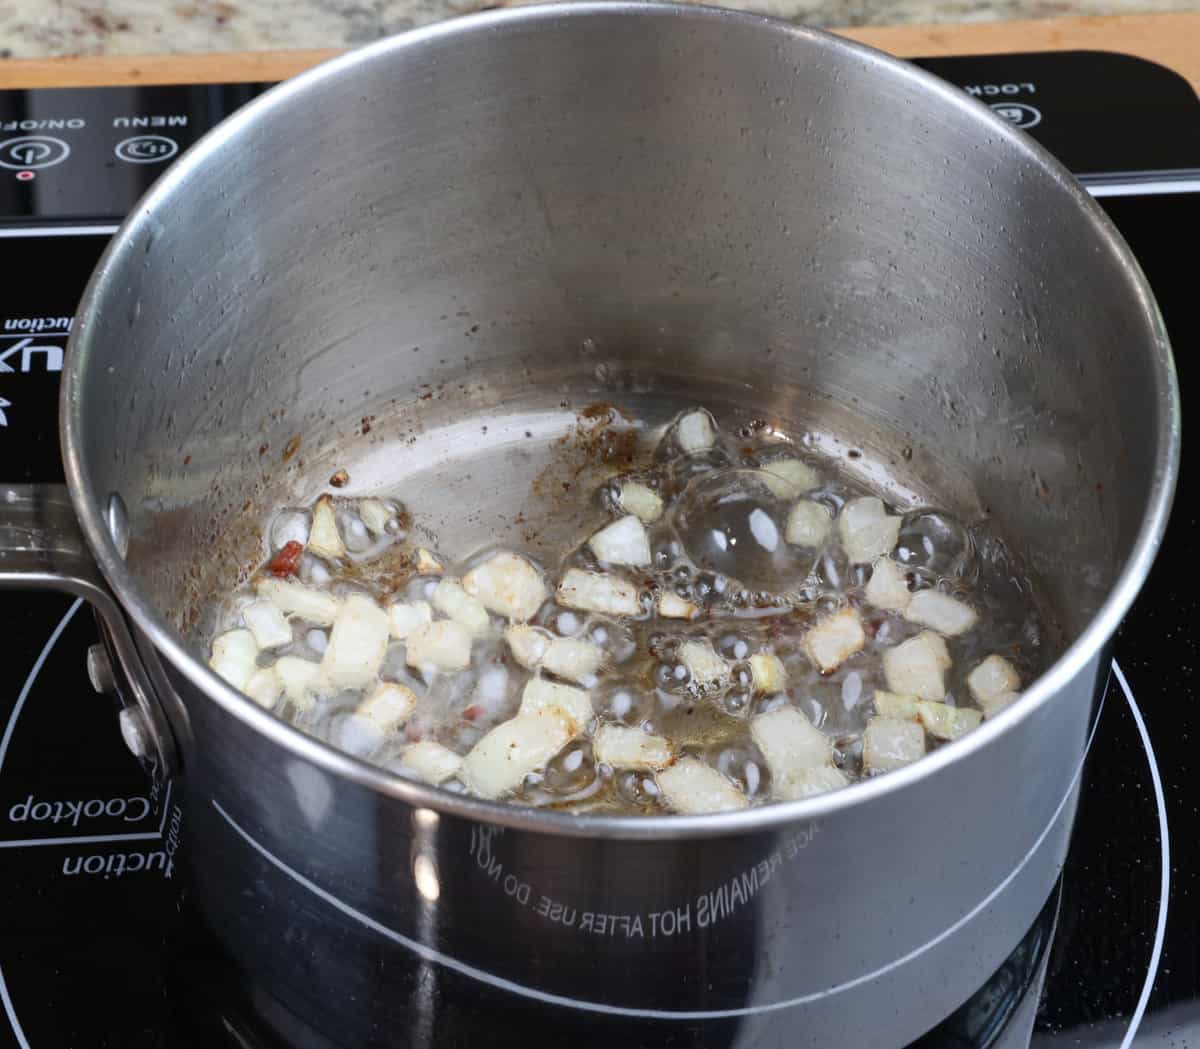 chopped onions cooking in bacon drippings in a small pot on the stove.